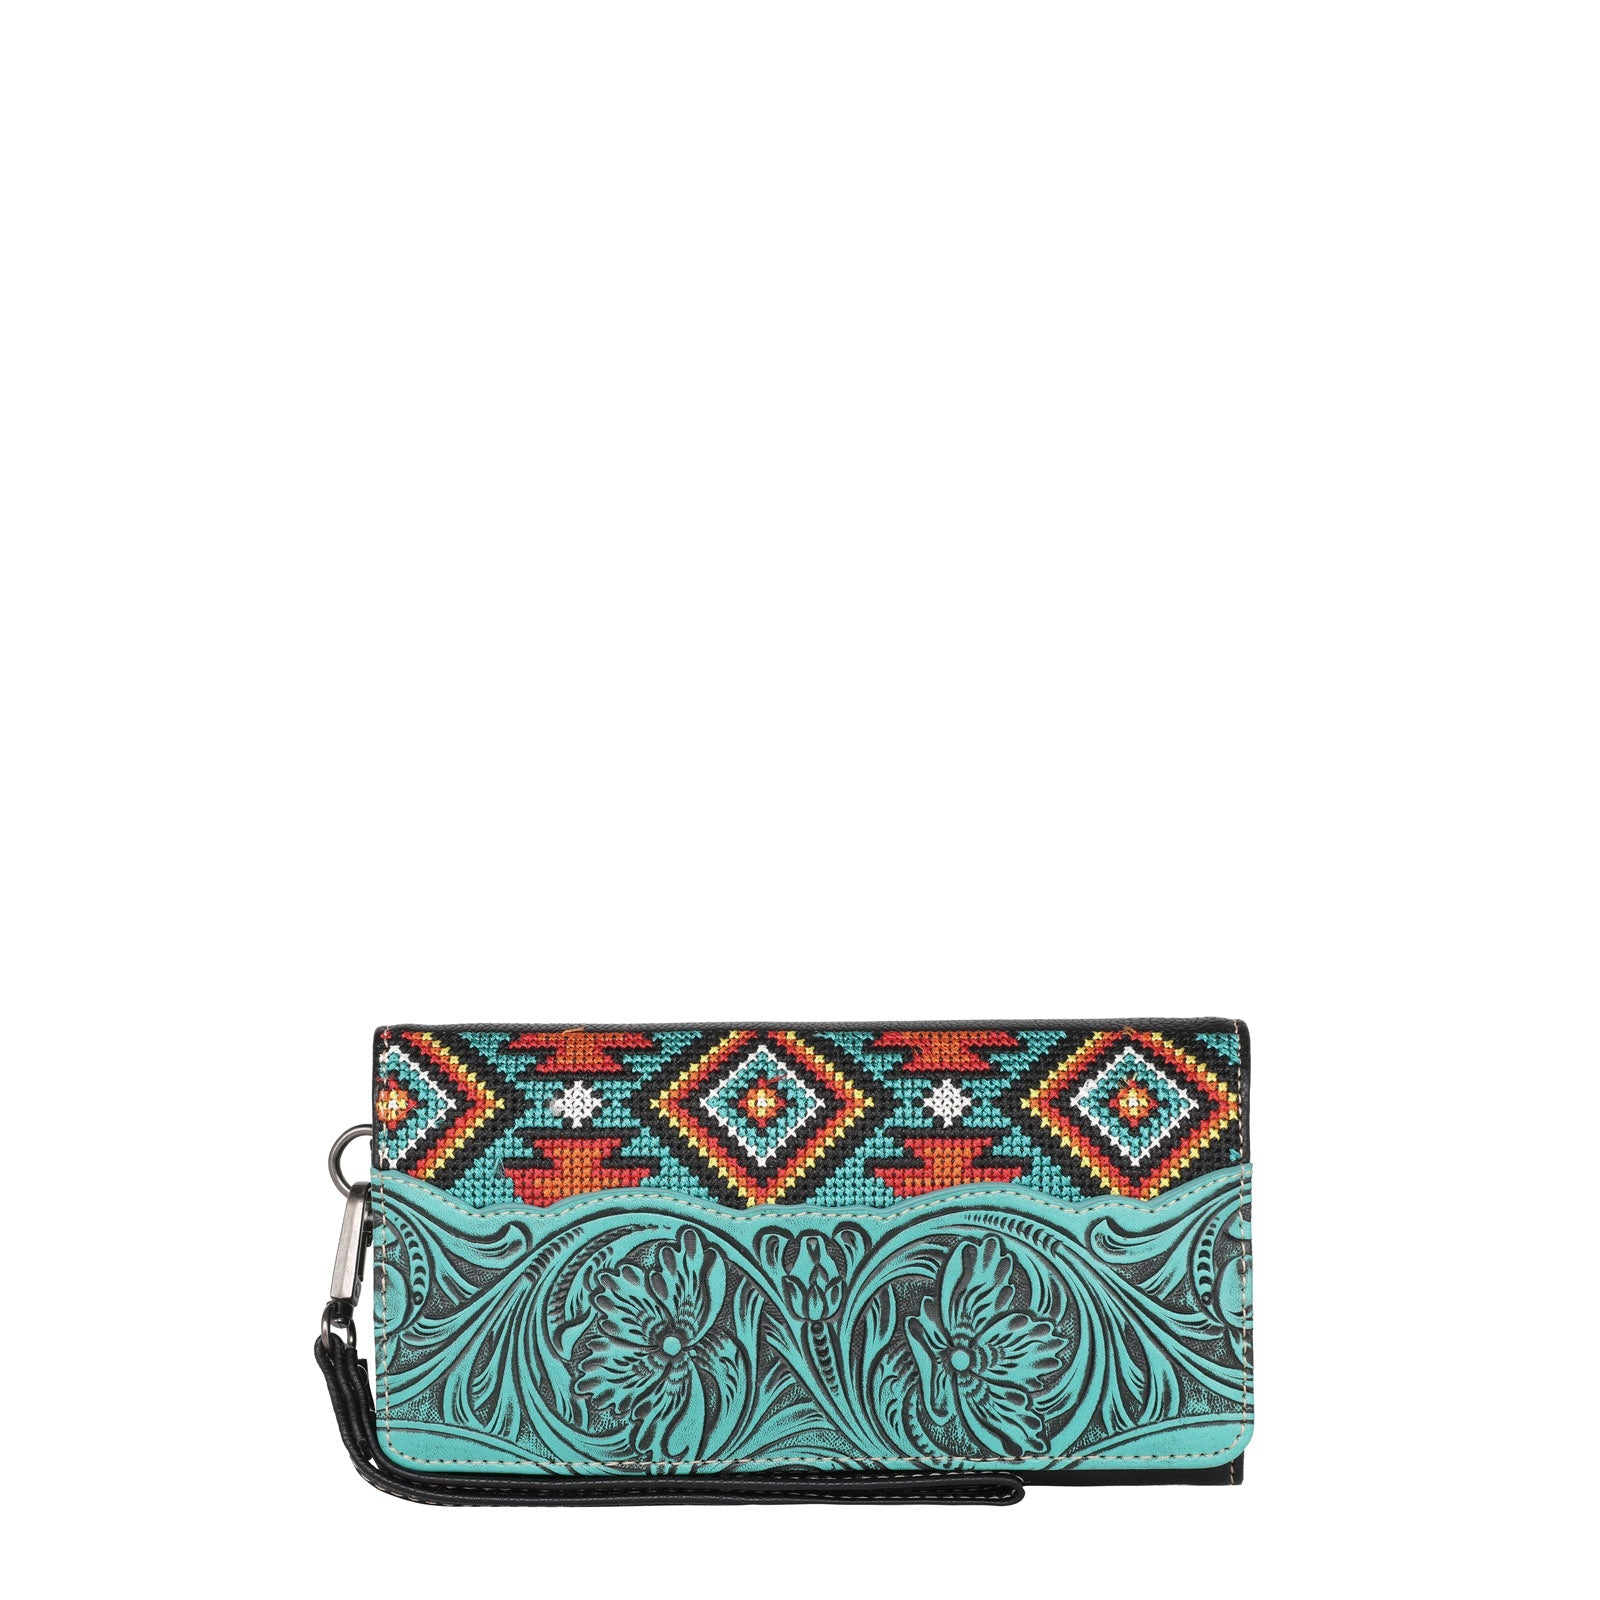 Montana West Tooled Collection Wallet - Cowgirl Wear